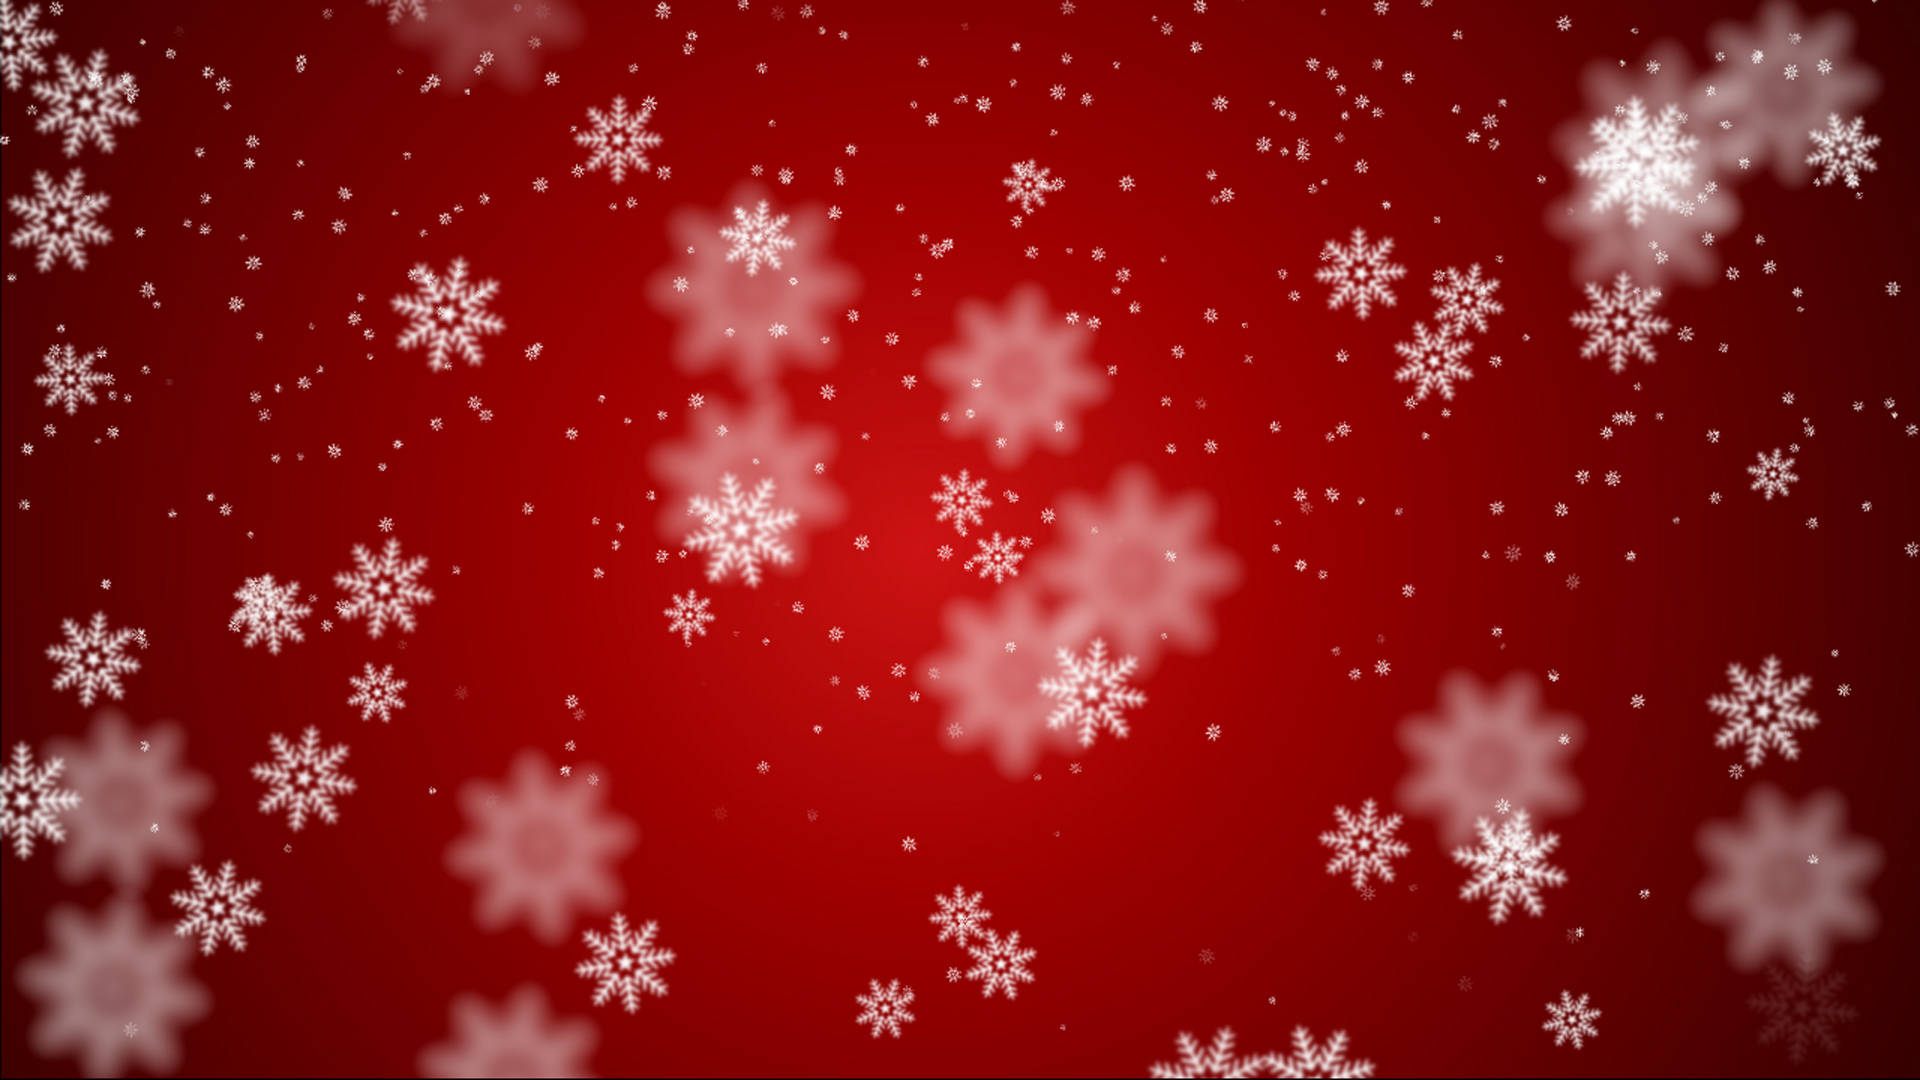 Snowflakes On Red Christmas Background